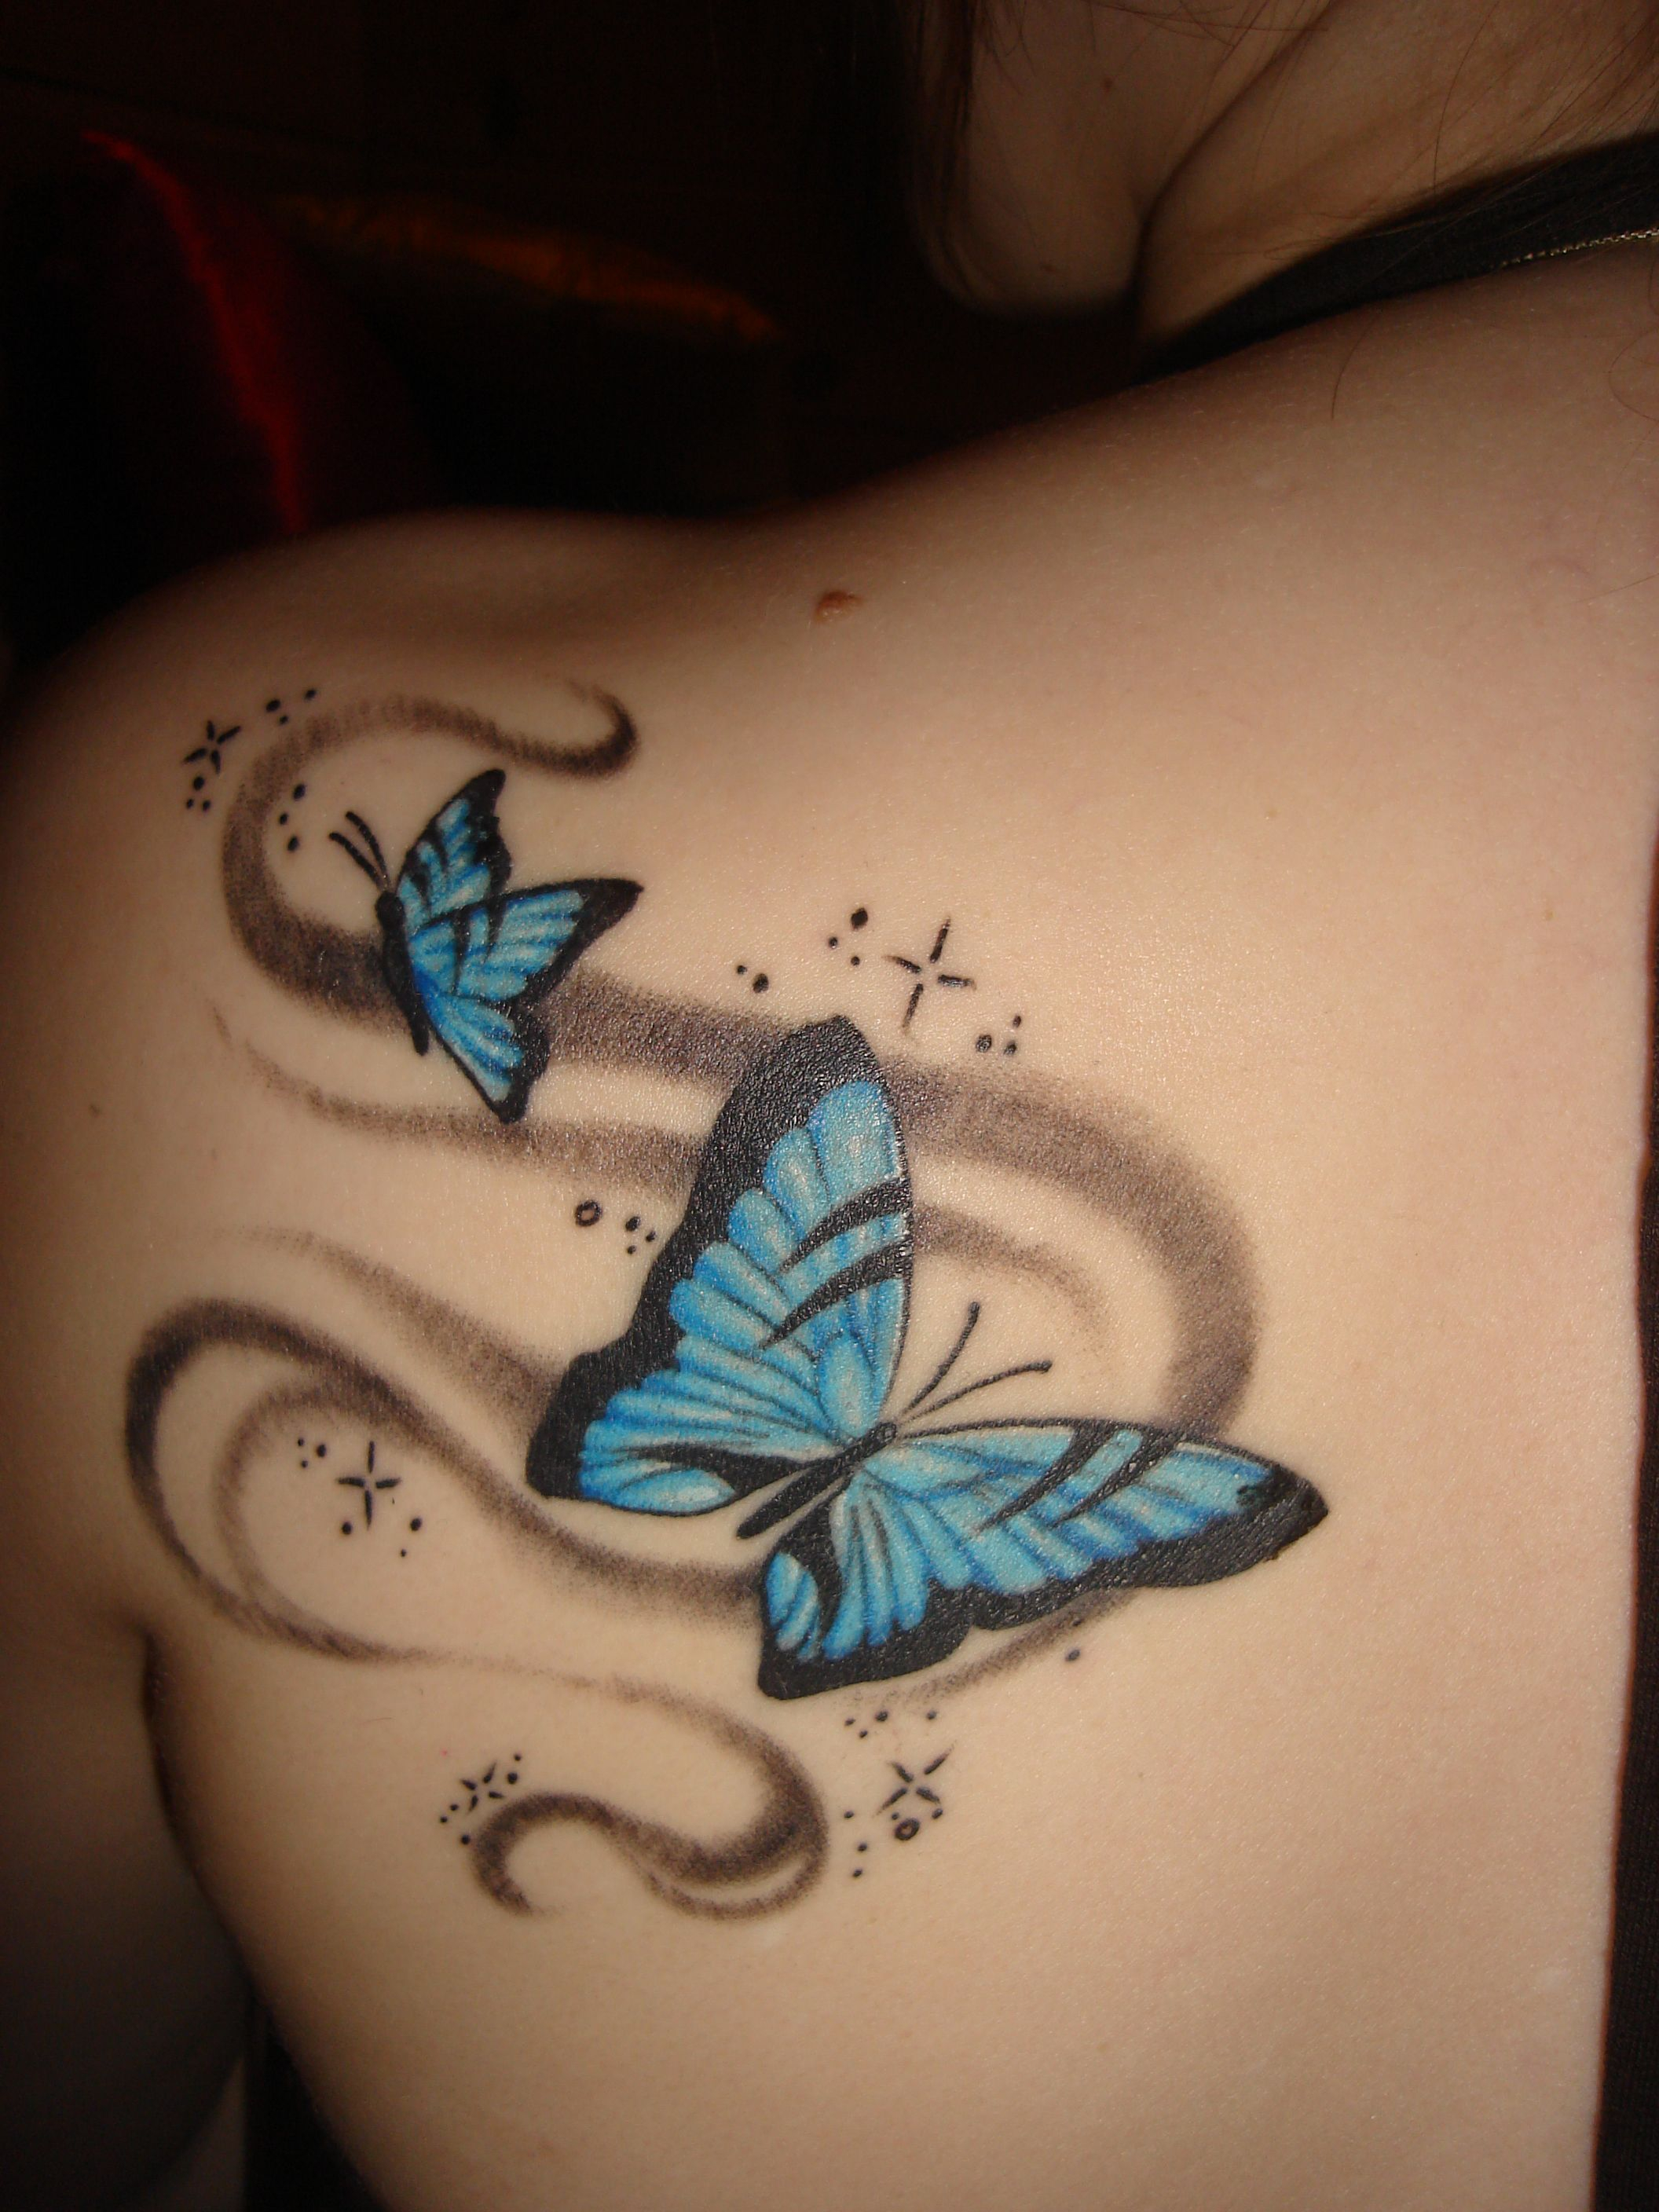 Butterfly Tattoo Meanings And Design Ideas Memere Tattoo Ideas for dimensions 2112 X 2816